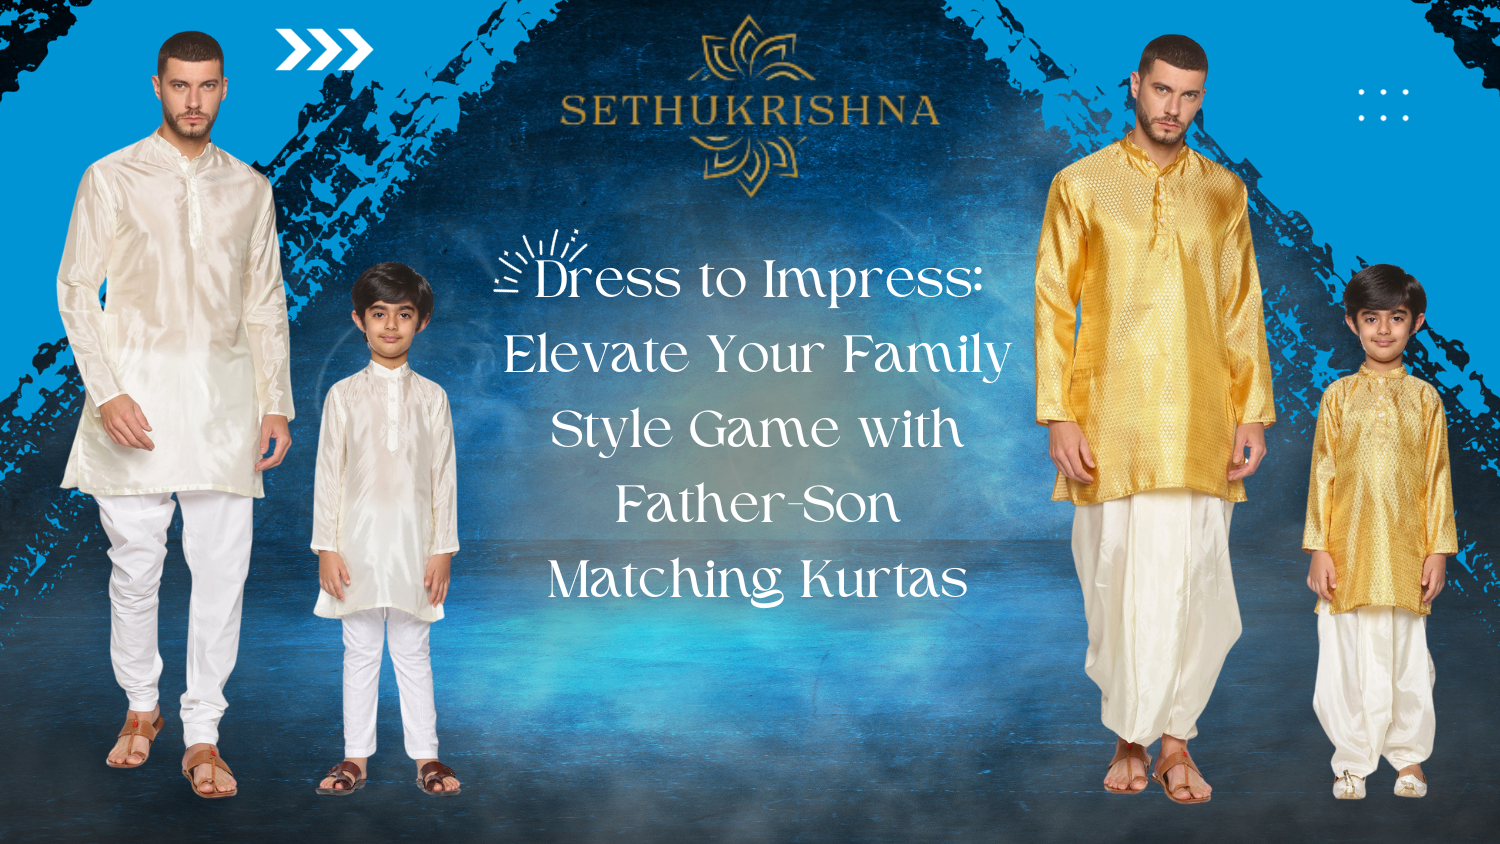 Dress to Impress: Elevate Your Family Style Game with Father-Son Matching Kurtas